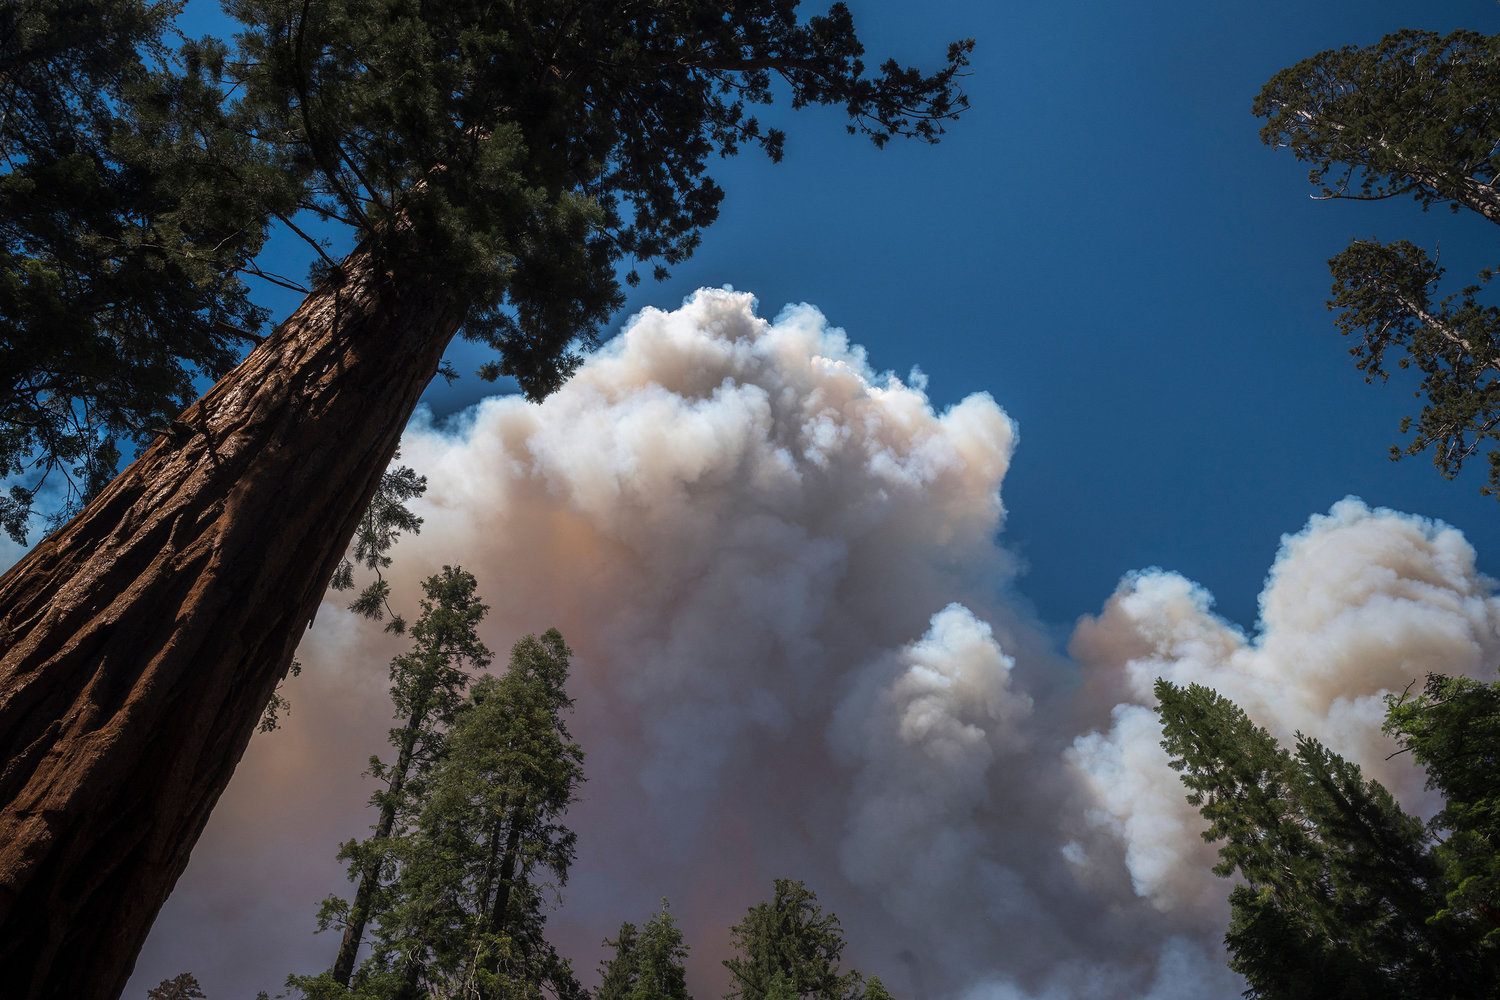 A large plume from the Washburn fire earlier this summer rises over Mariposa Grove in Yosemite National Park in California. (Nic Coury/AFP/Getty Images/TNS)